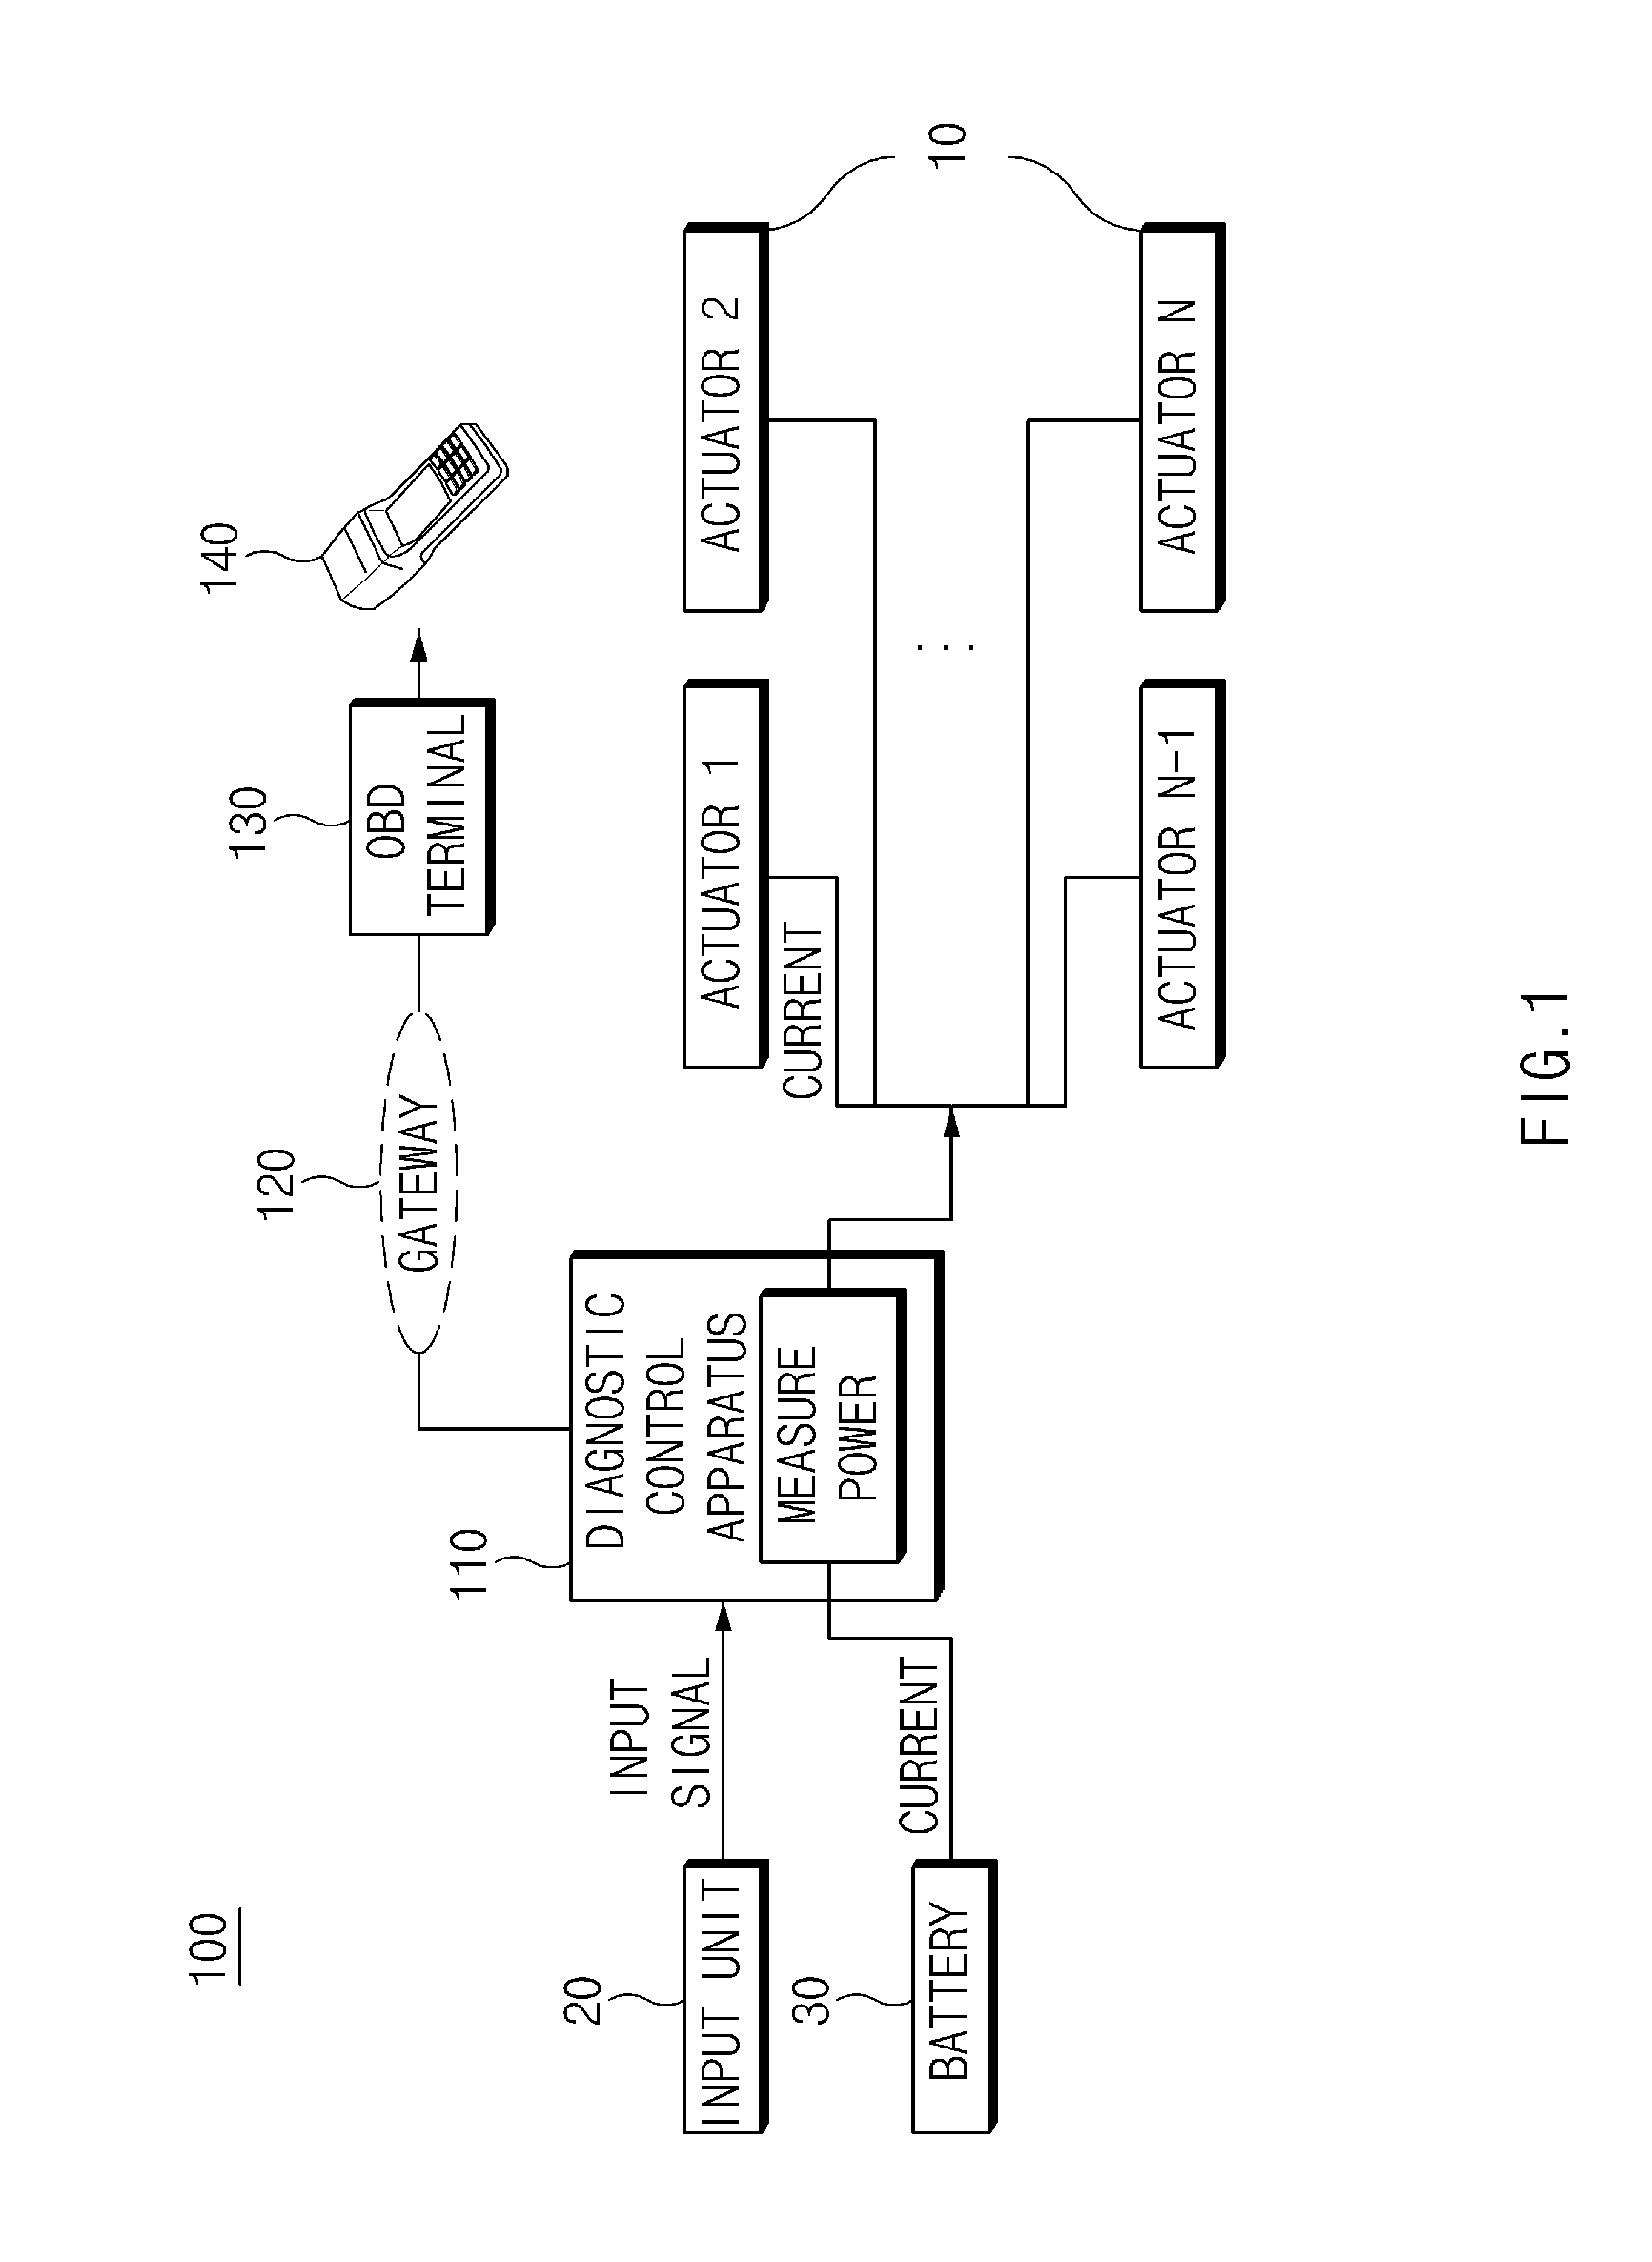 Apparatus and method for diagnosing actuators in vehicle